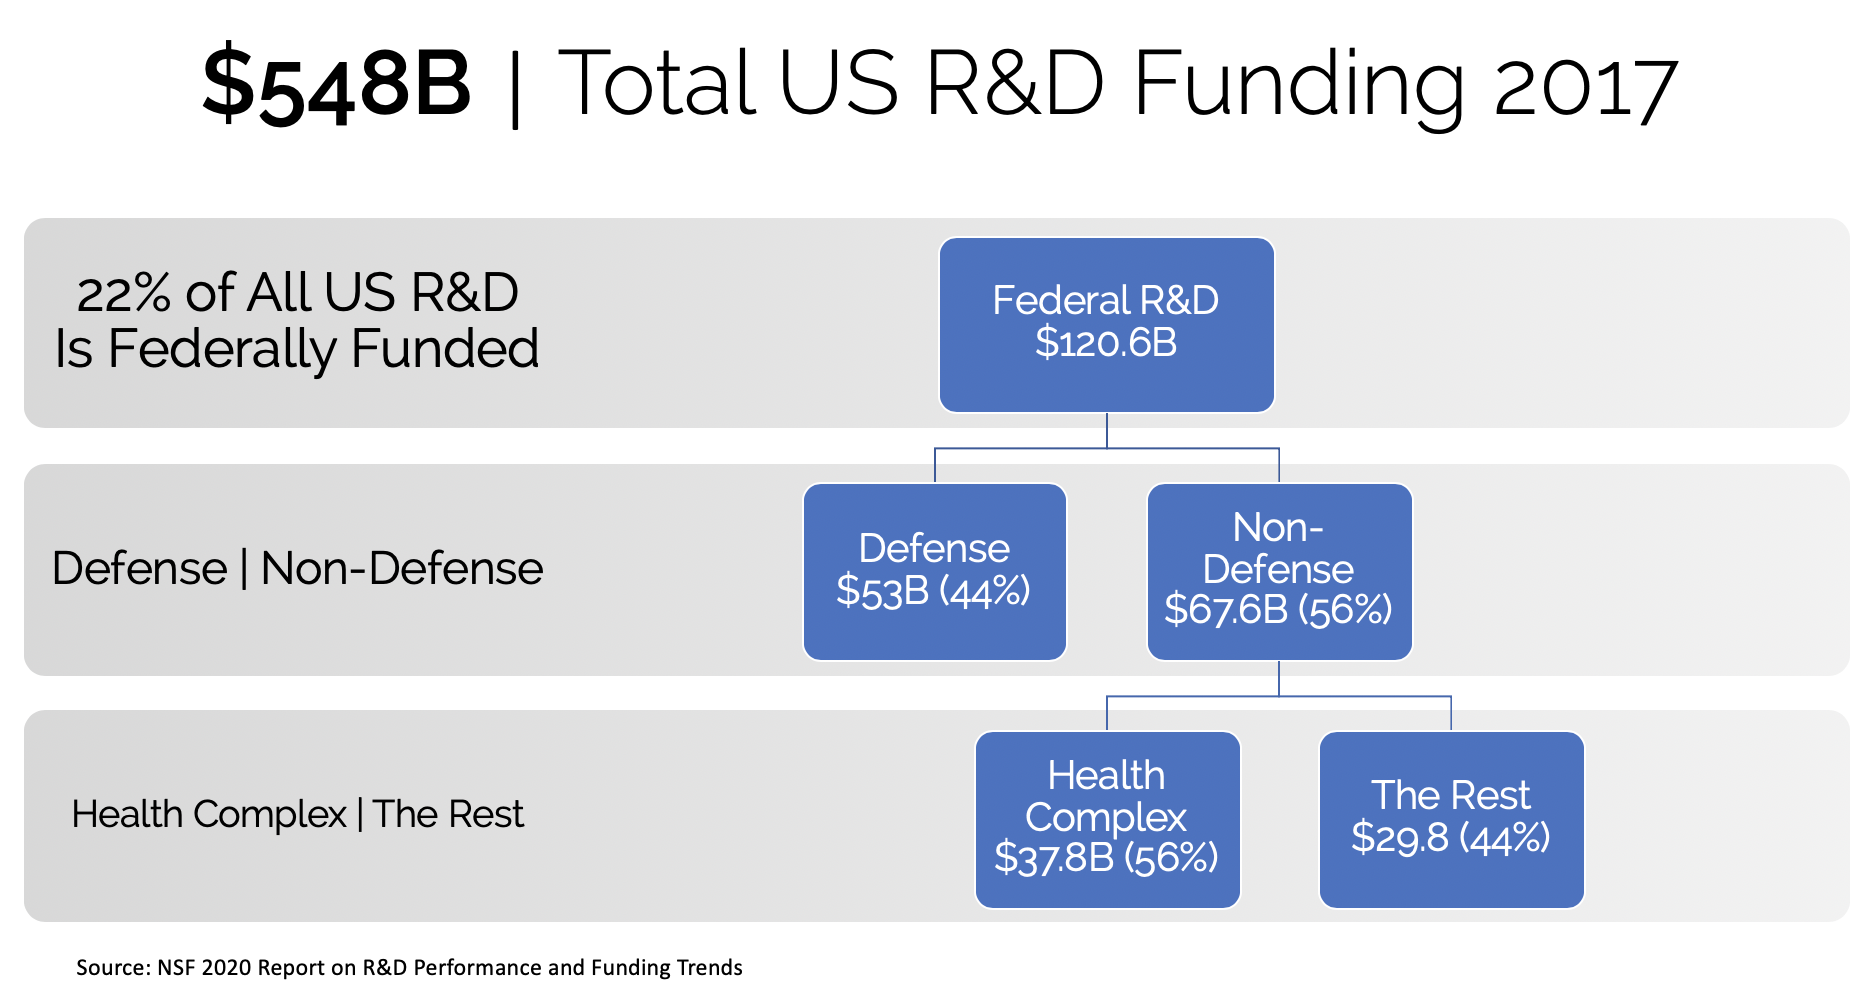 A breakdown of federal research and development funding by research area.